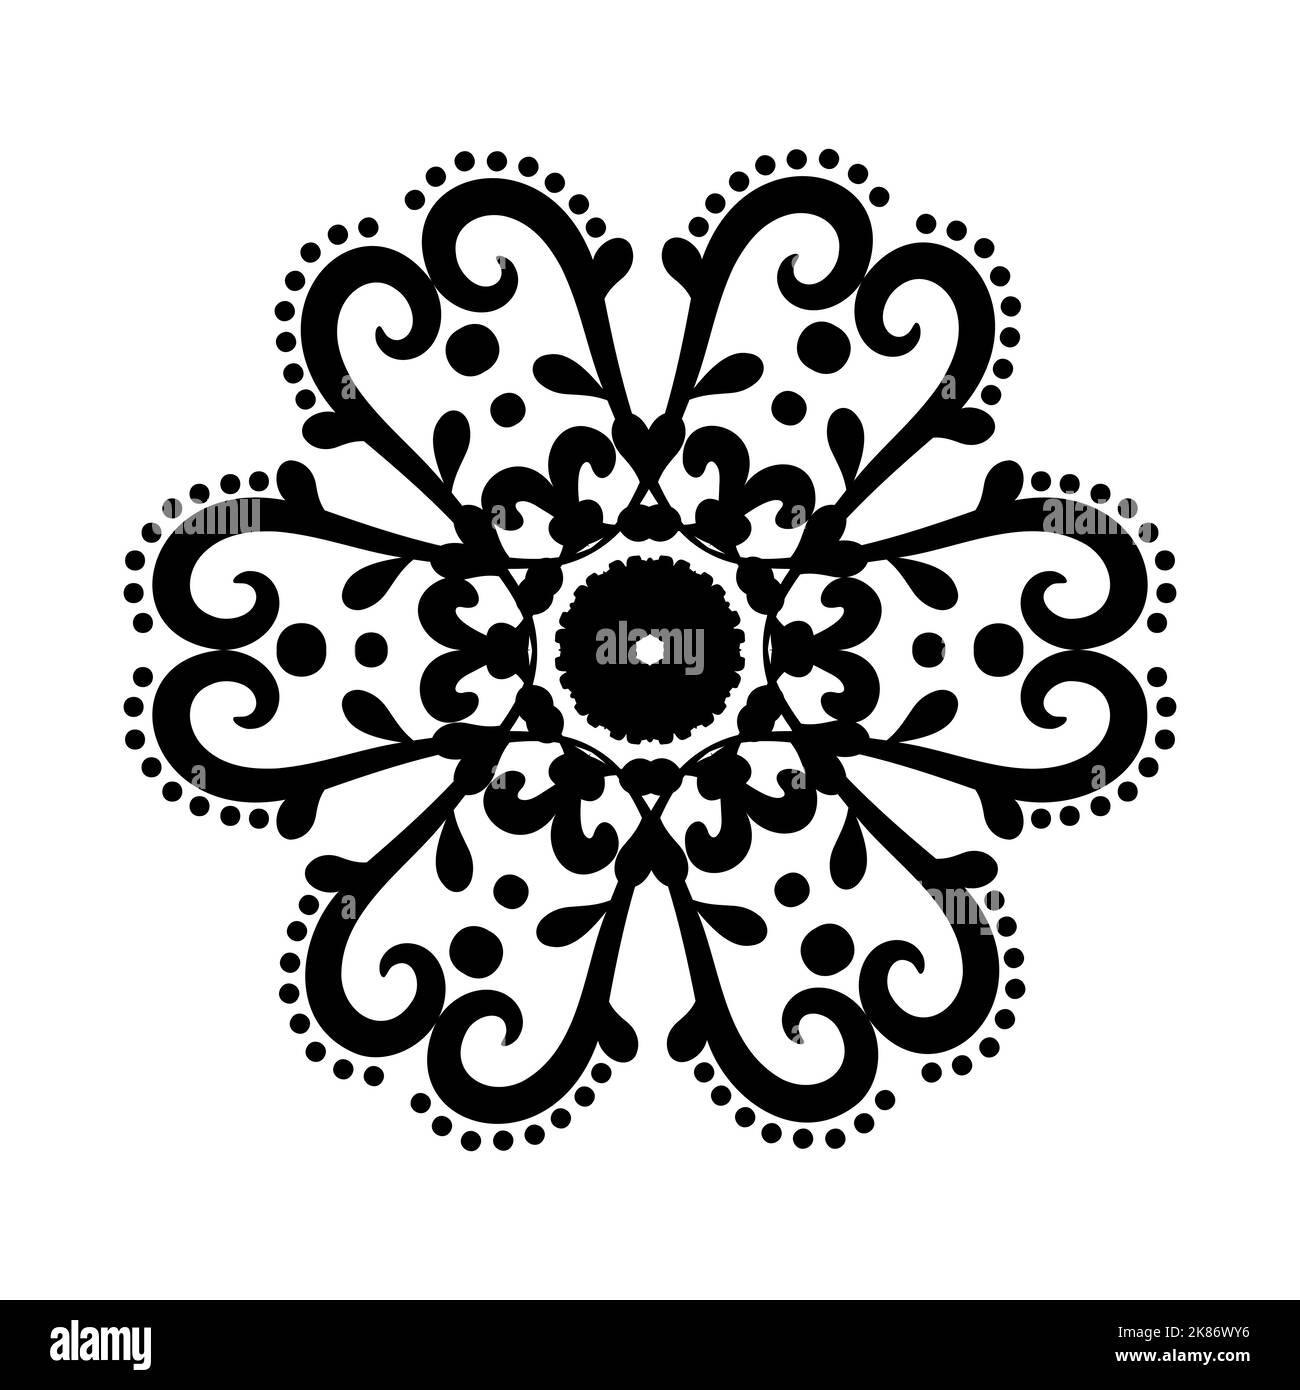 Decorative pattern mandala. Round floral black and white ornament. Decorative background for tattoo, stencil or home decor. Vector illustration. Stock Vector